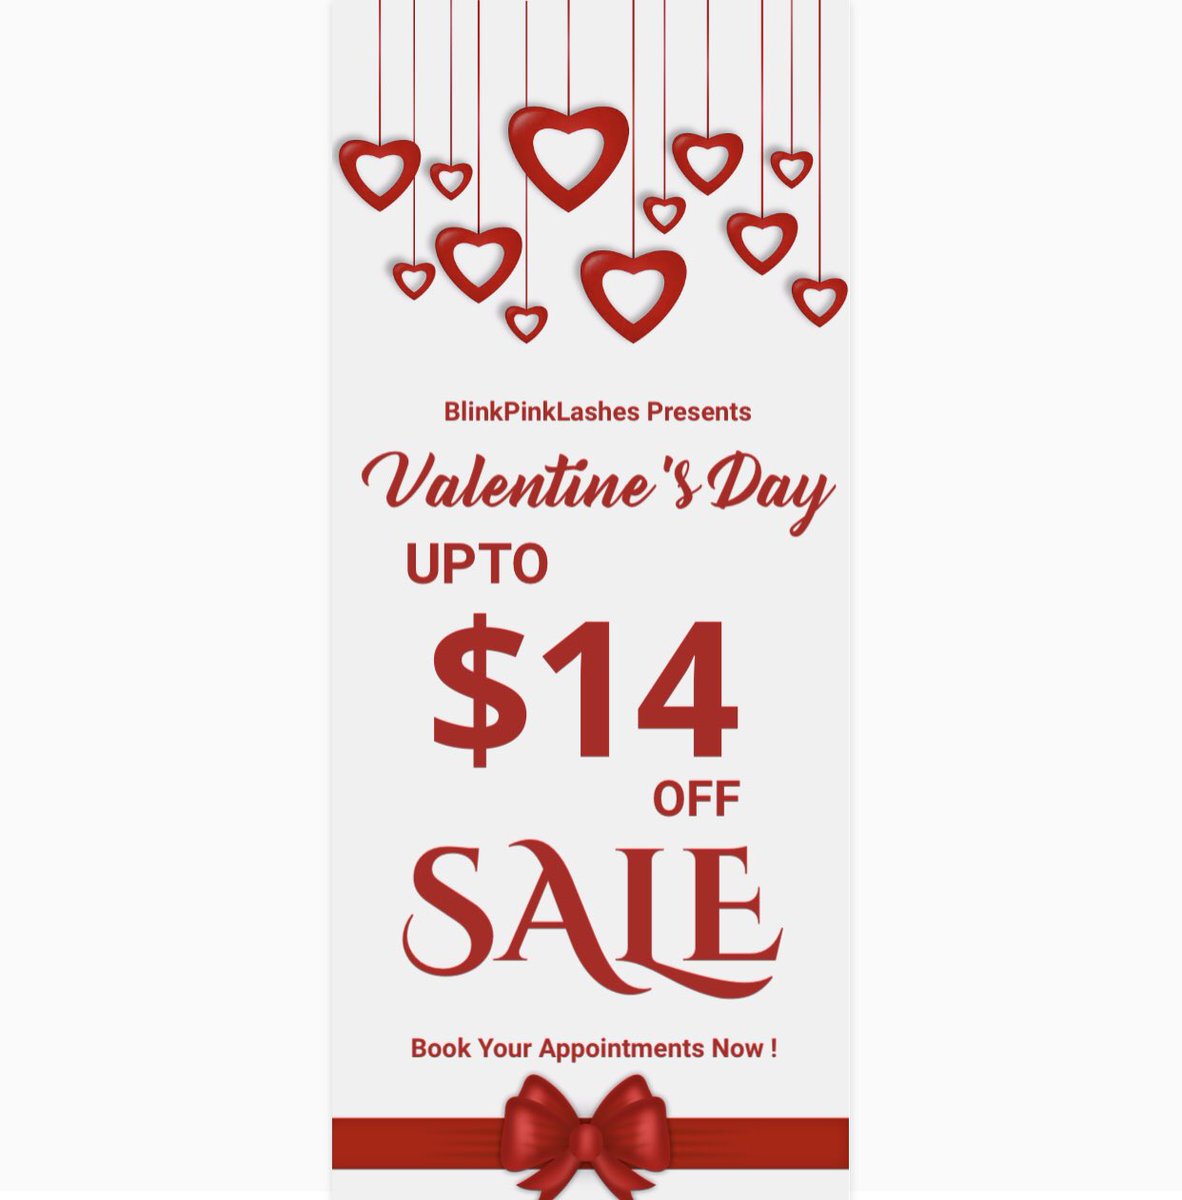 ❣️❤️ It’s The Love For Meeee , Don’t Miss Out On This Offer ! $14 OFF All Sets Just In Time For Valentine’s Day ❤️❣️
.
.
.
#losangeleslashtechnician #eyelashextensions #losangelescalifornia 
#lashfunny #lashes